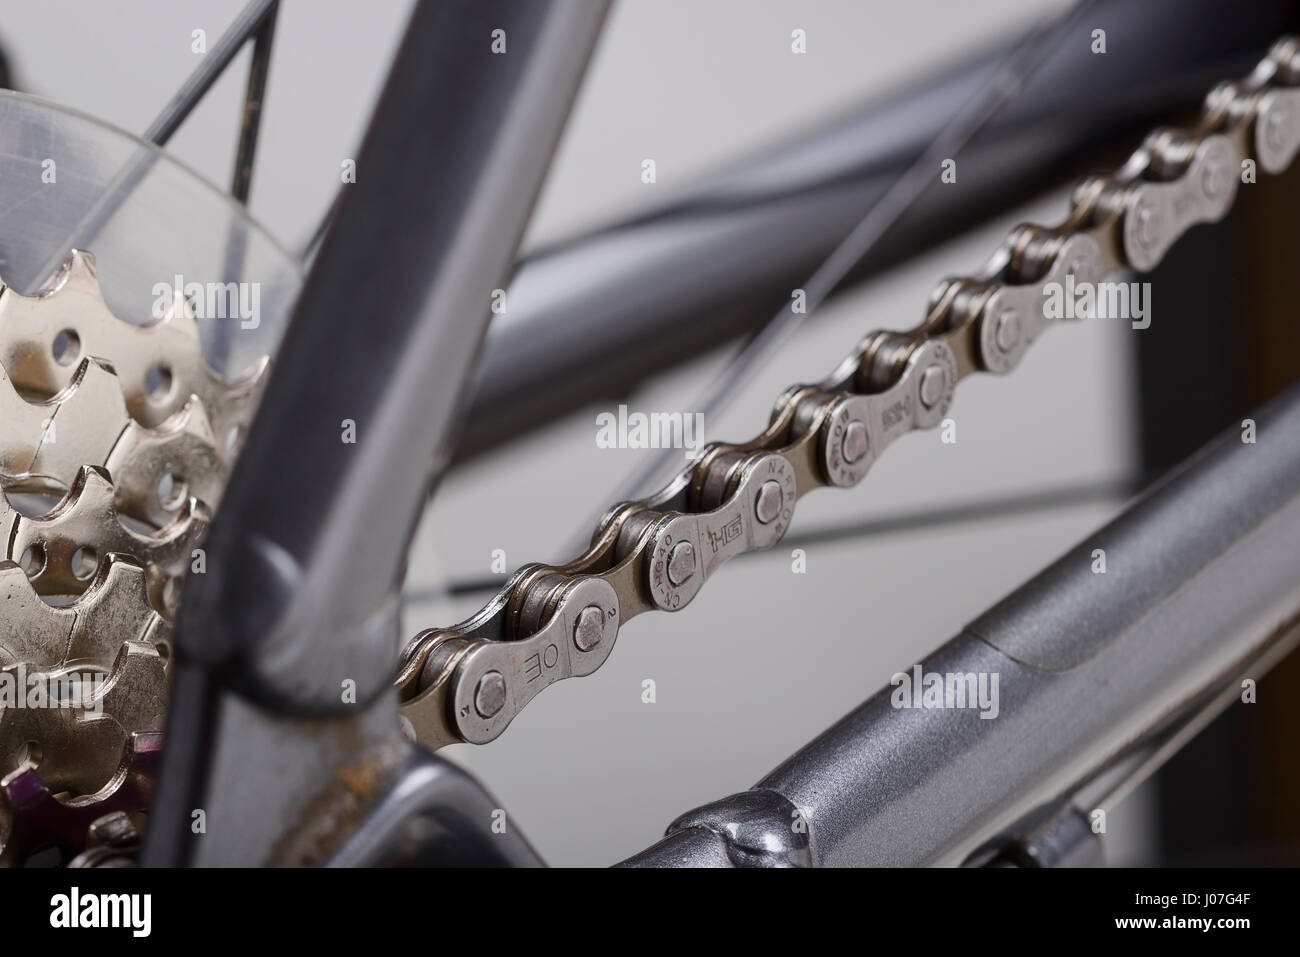 Close up of a bicycle chain and gear cassette. Stock Photo